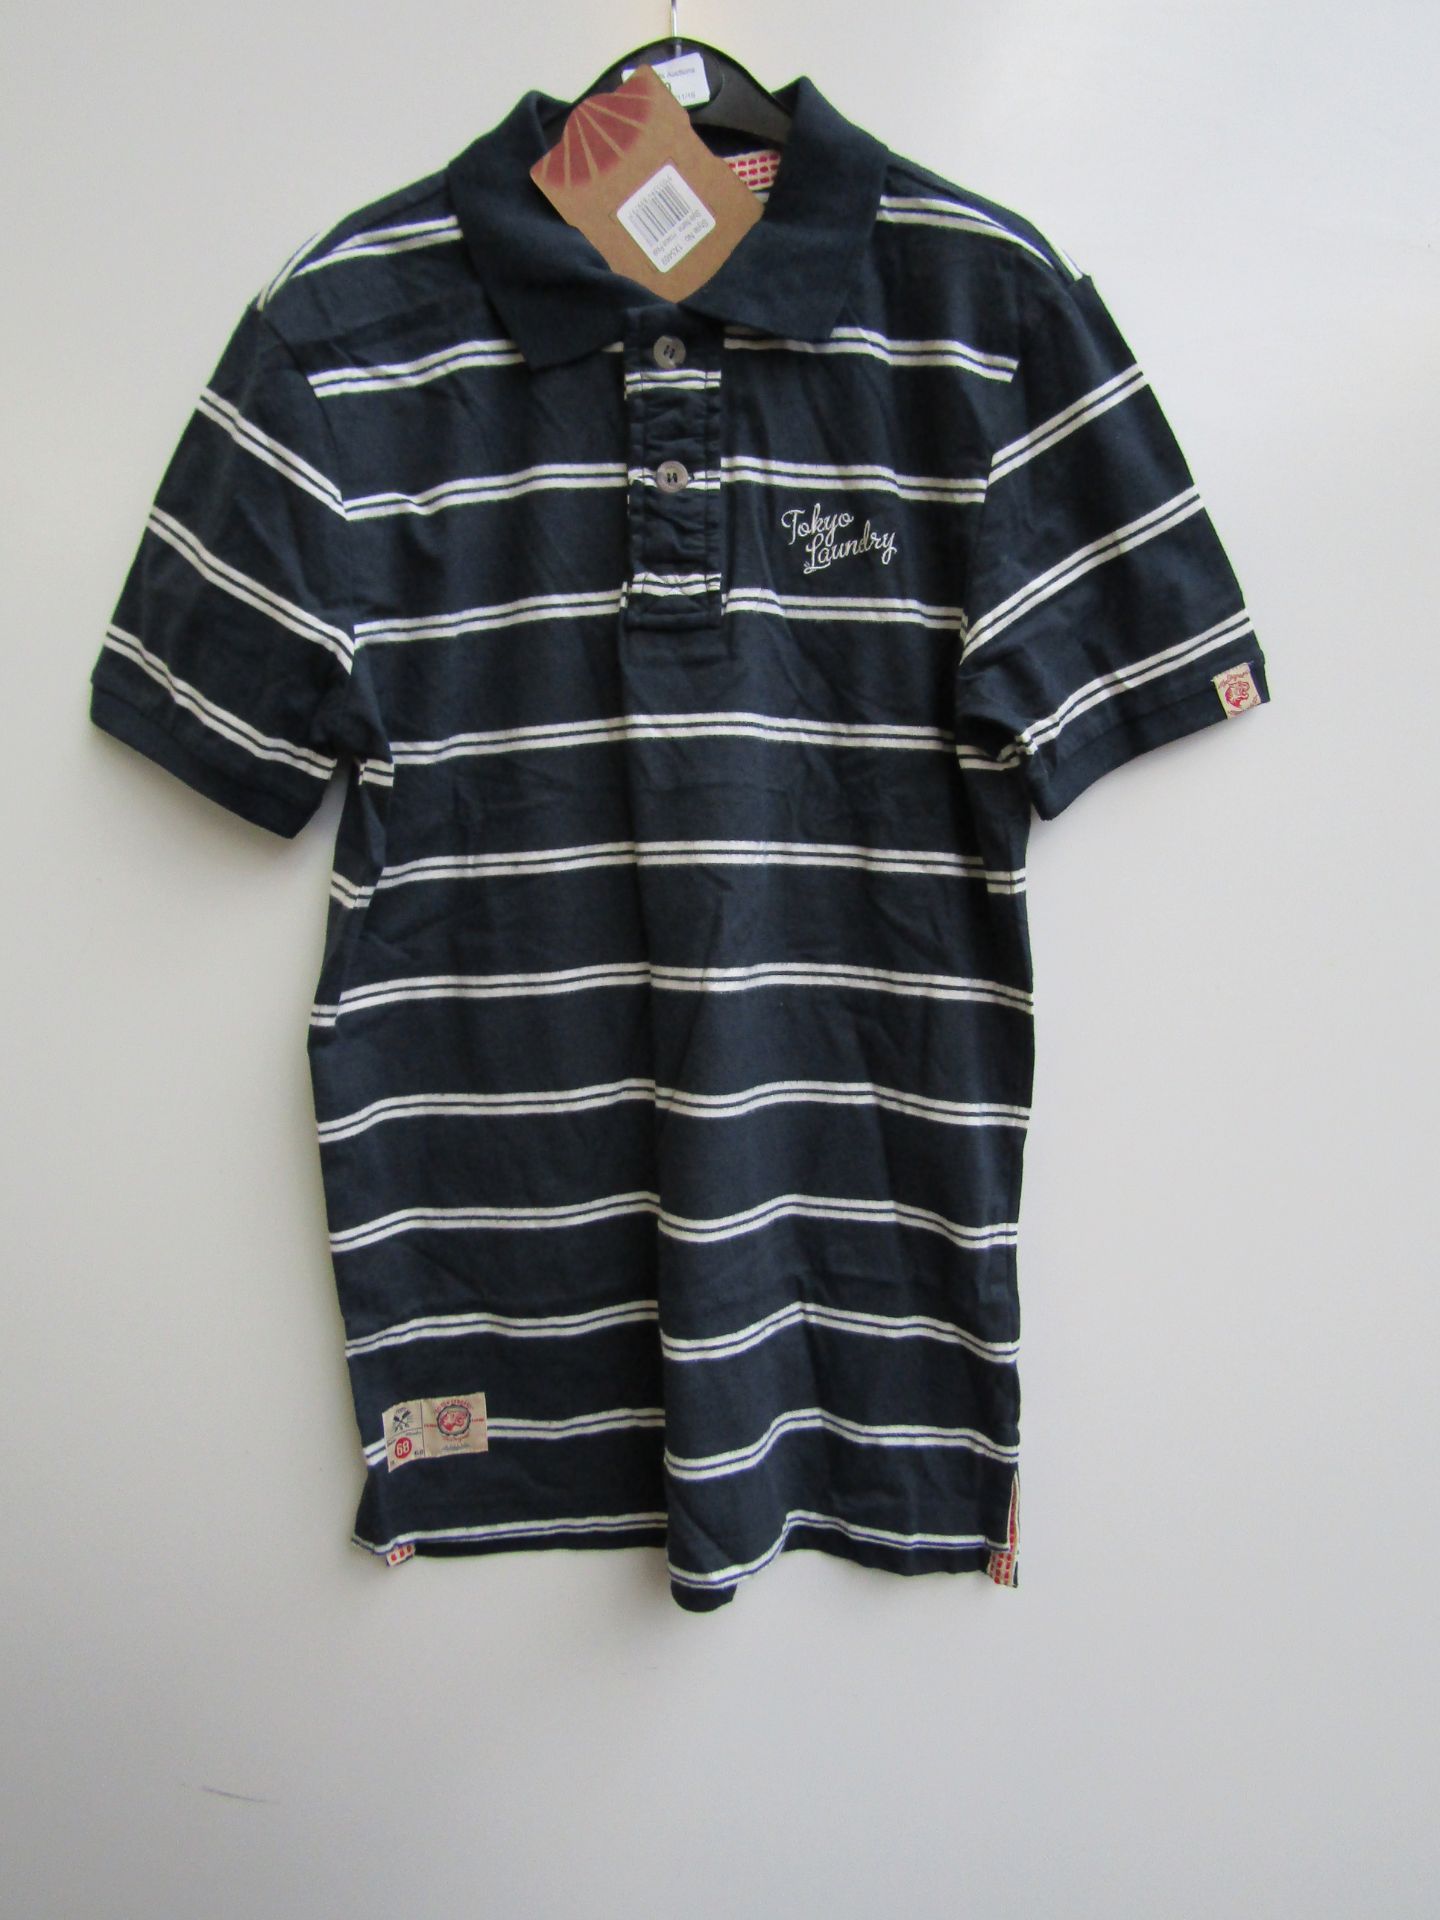 Tokyo Laundry Polo Shirt, New with tag, size small